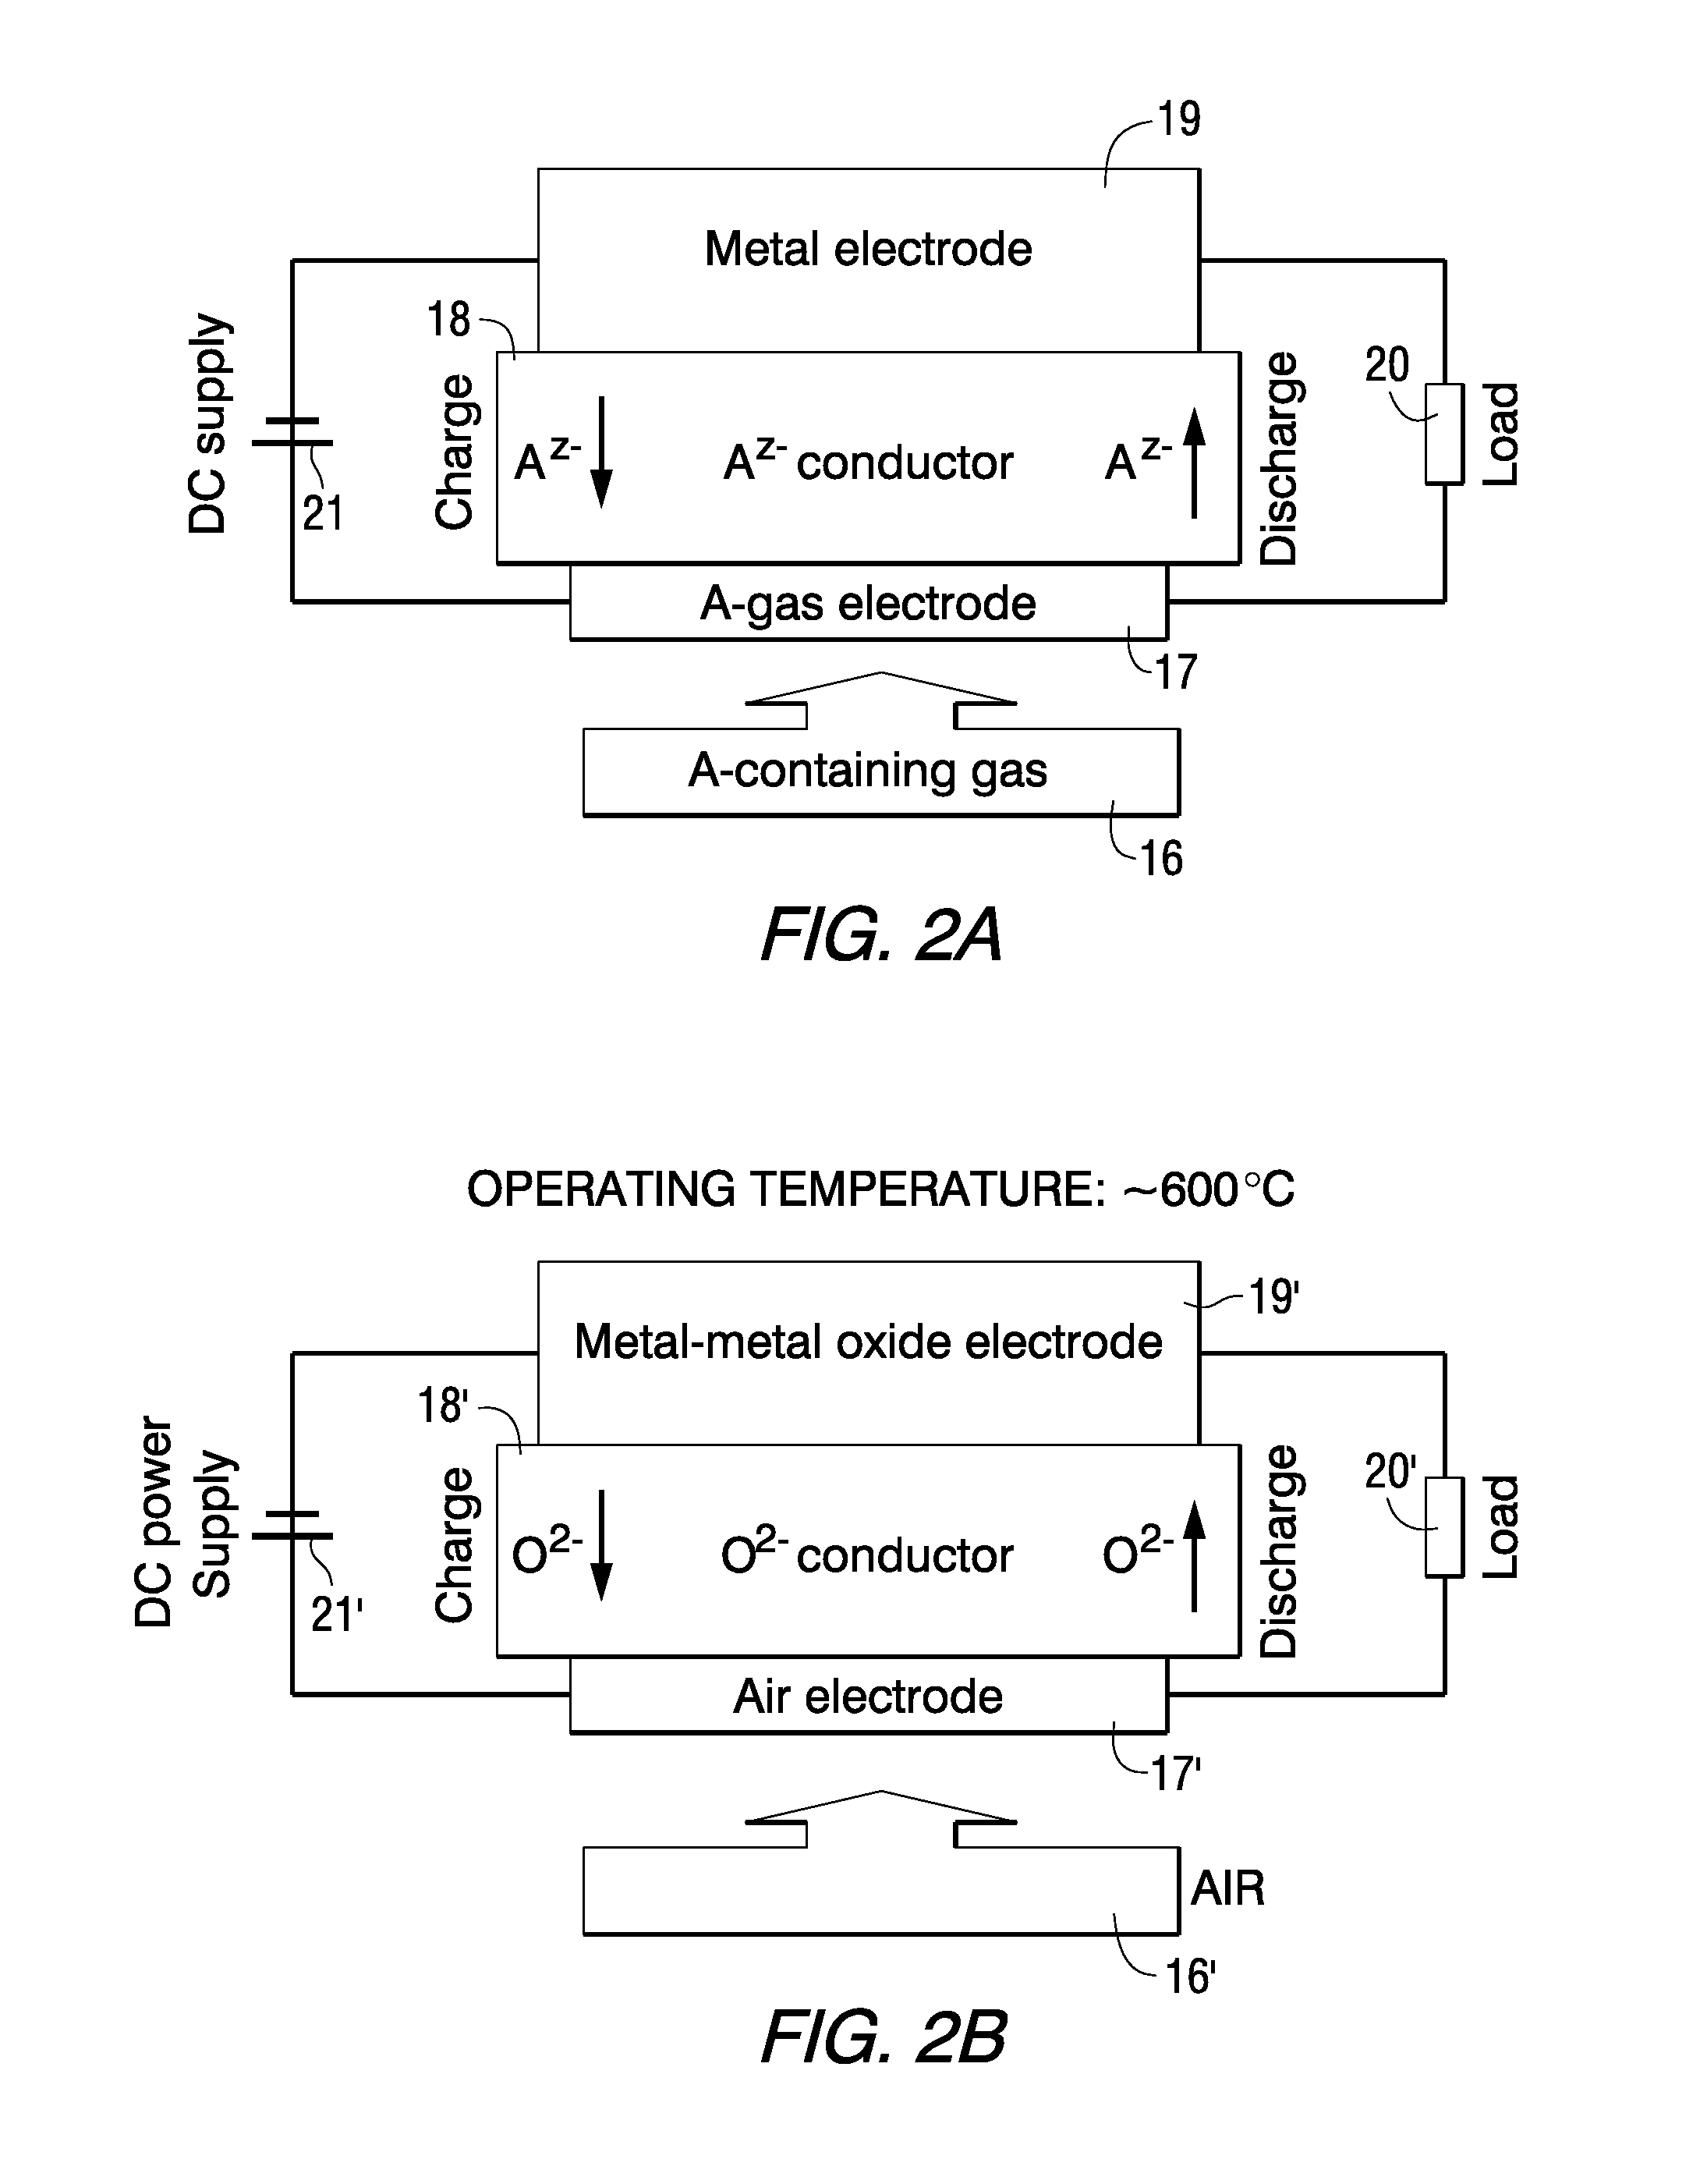 Electrical Storage Device Including Oxide-ion Battery Cell Bank and Module Configurations